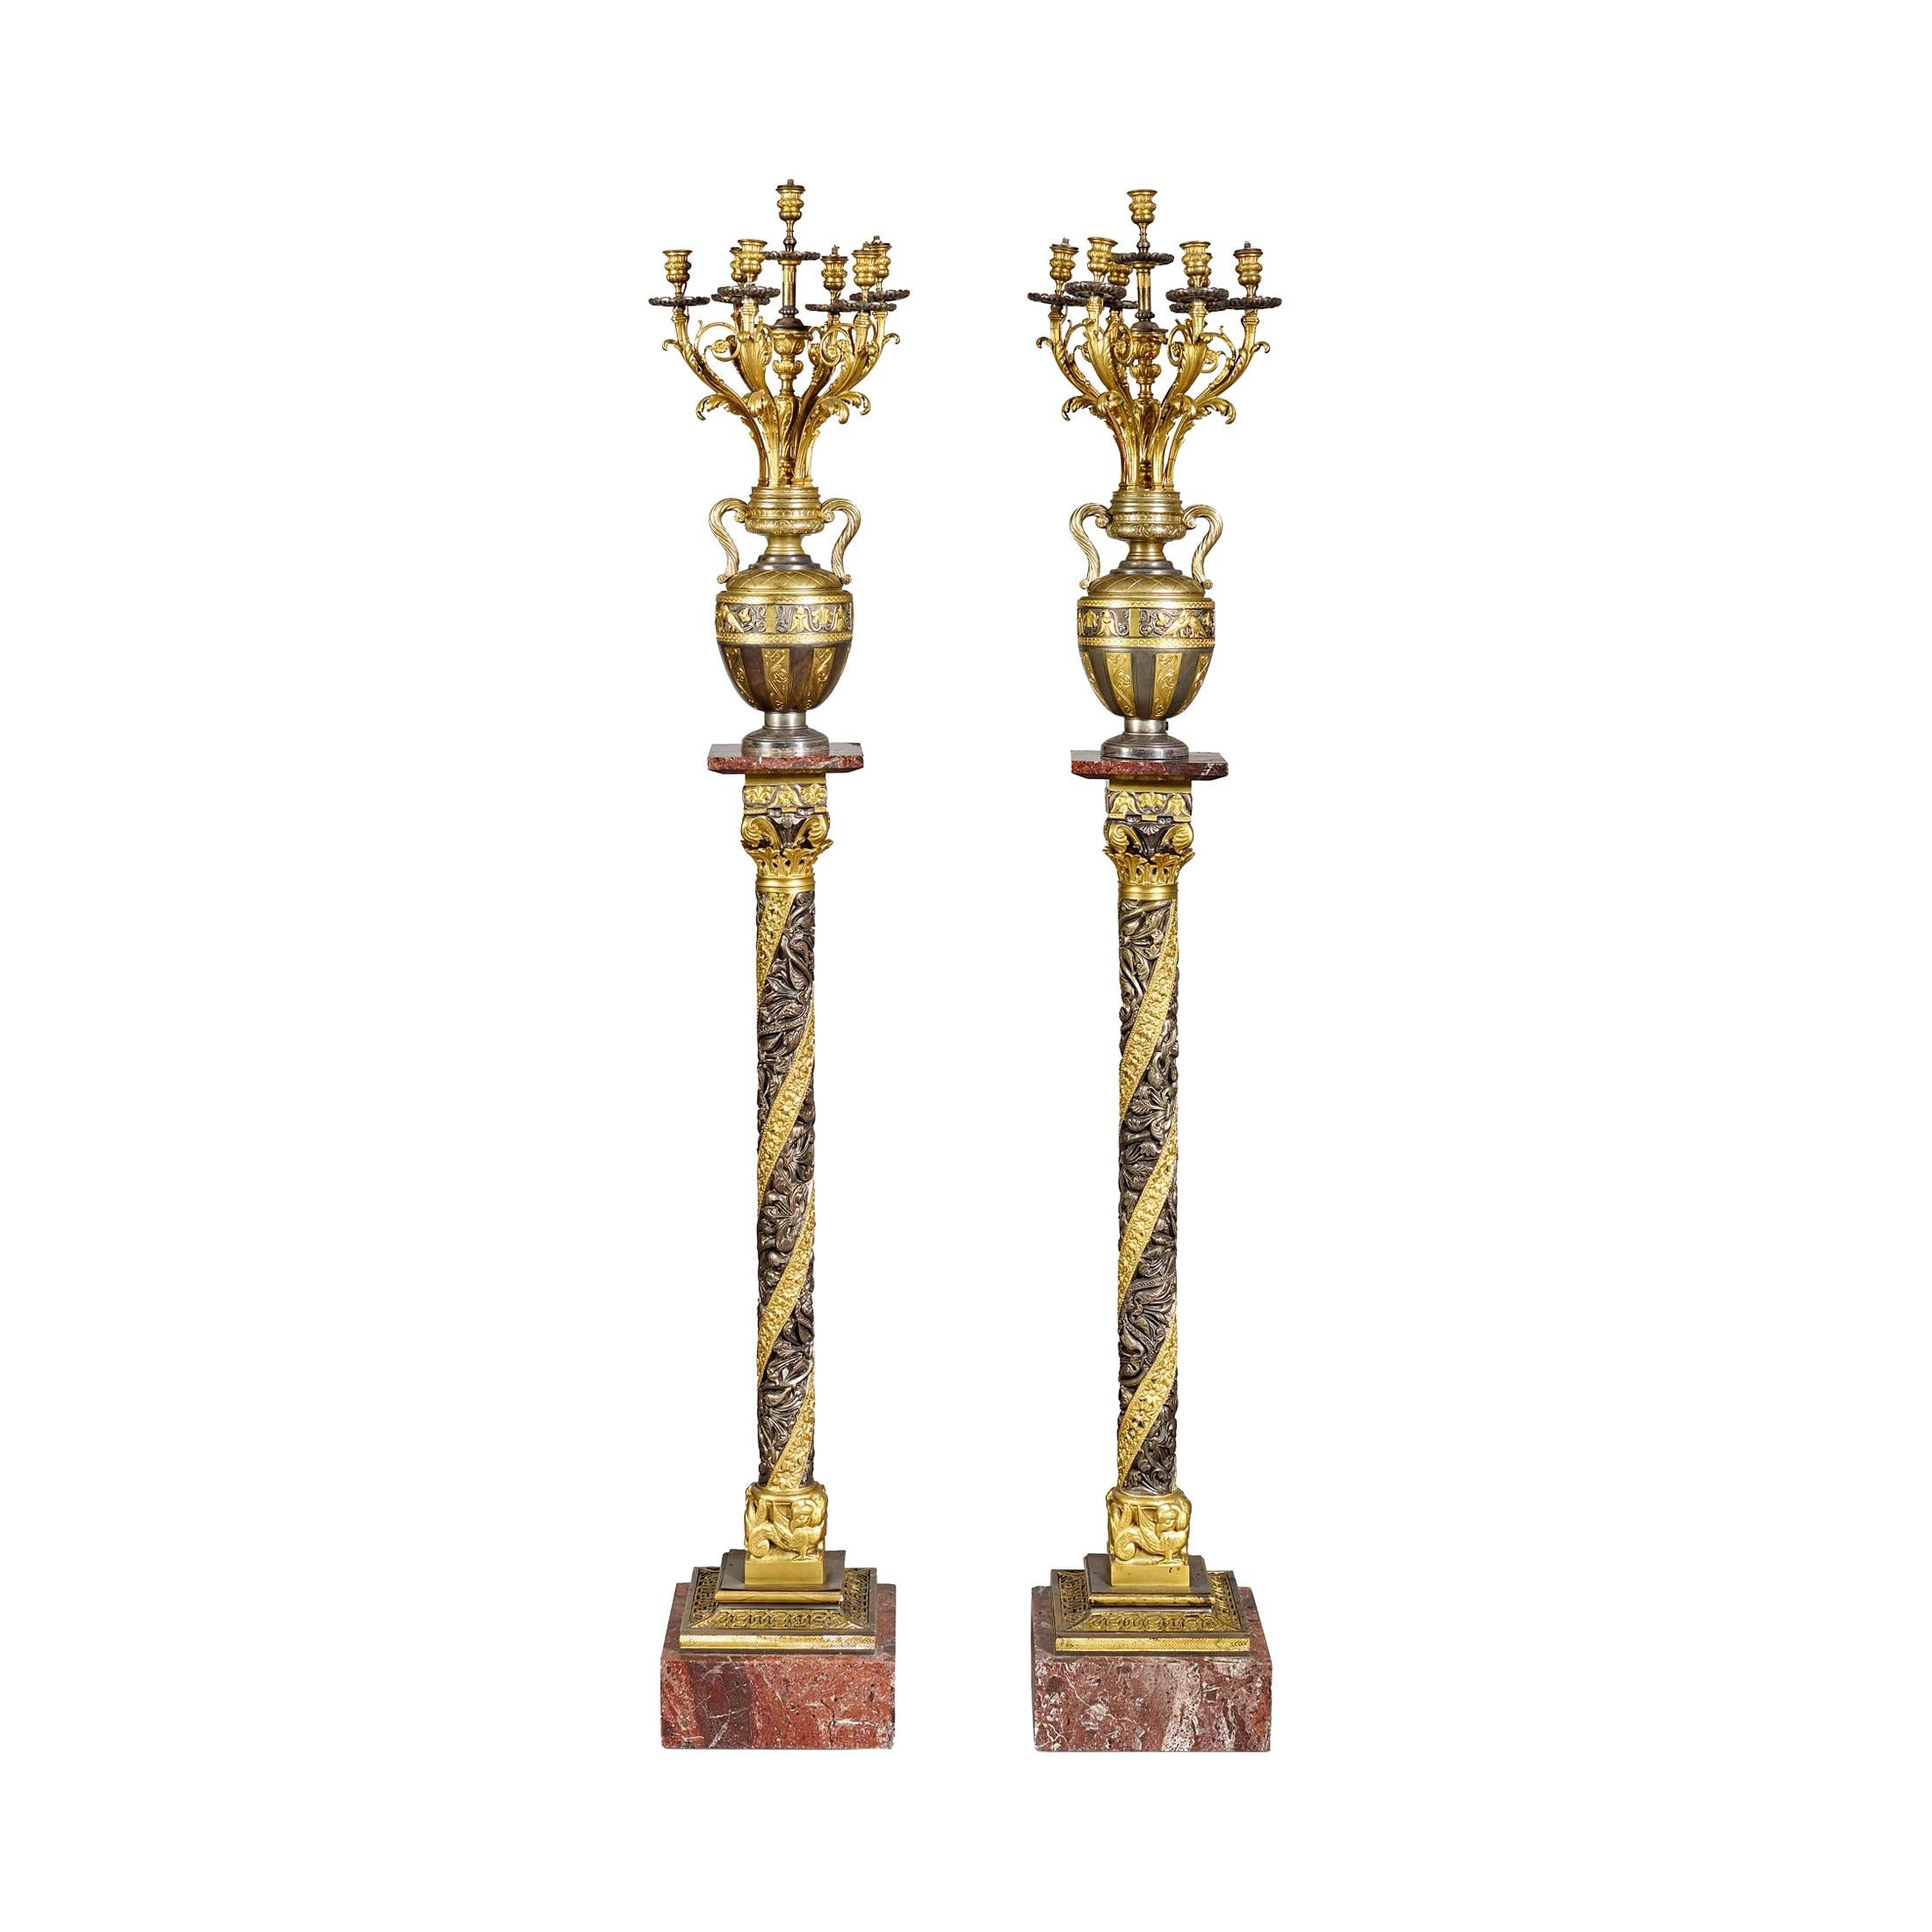 Highly Important Exhibition Pair of Gilt Silvered Bronze Candelabra on Pedestal For Sale